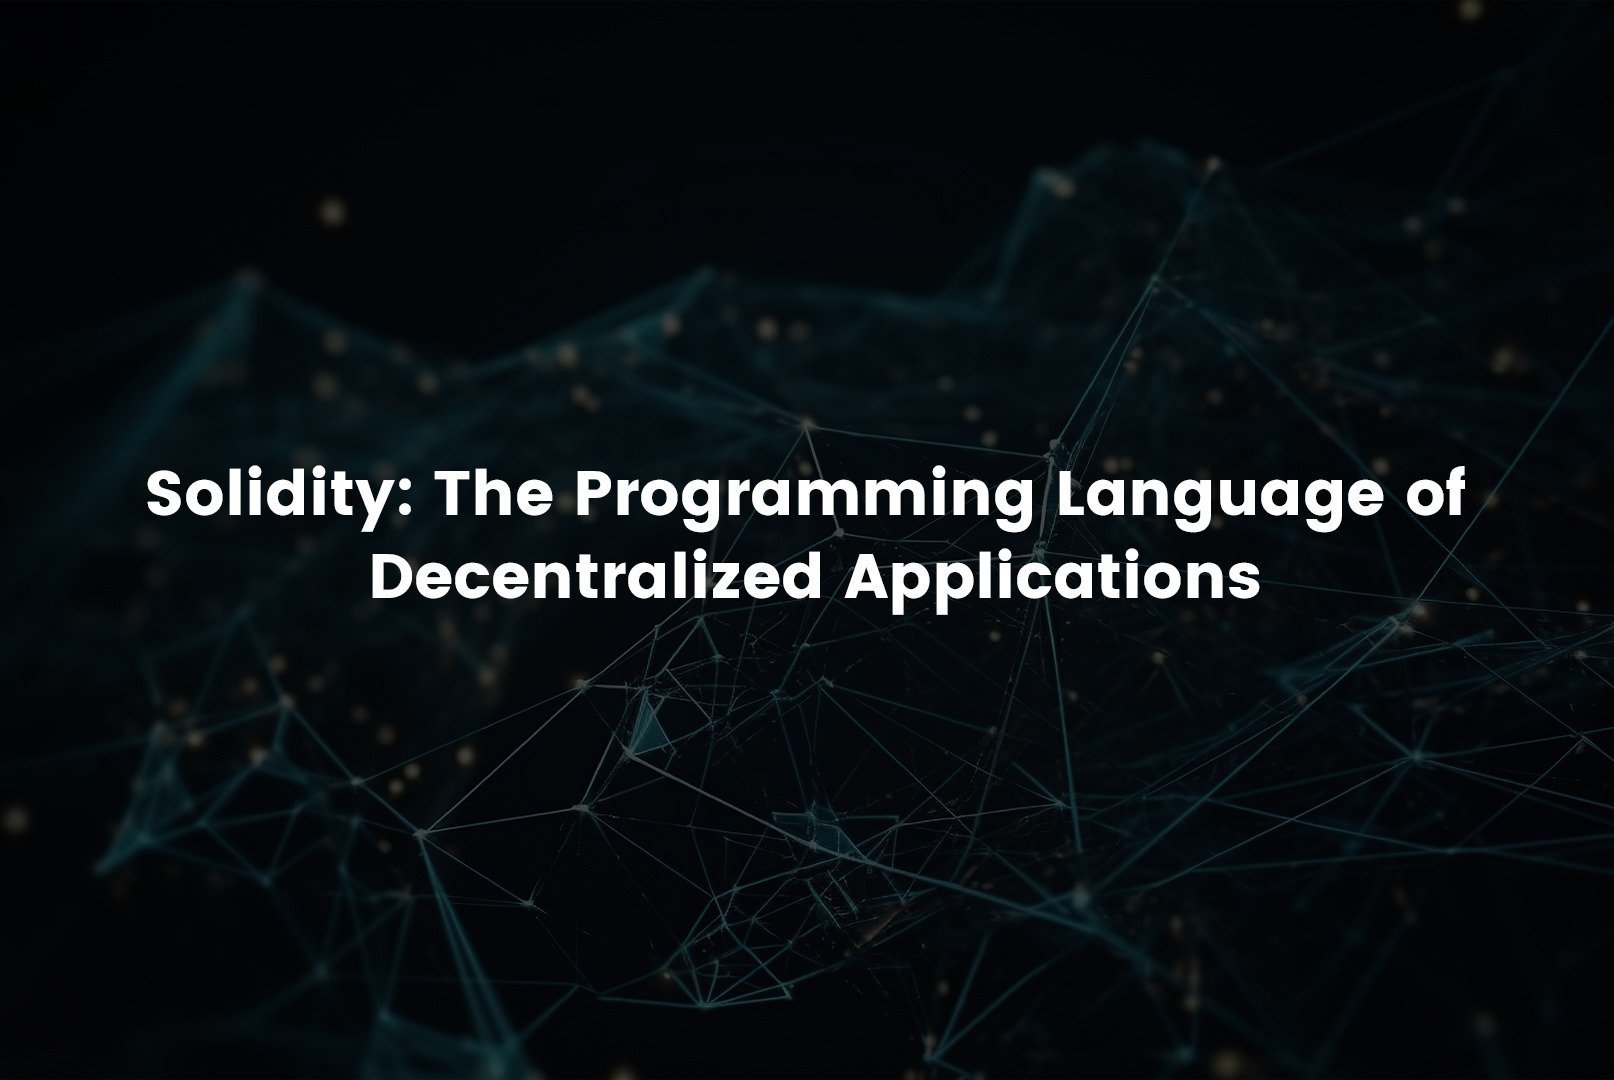 Solidity The Programming Language of Decentralized Applications